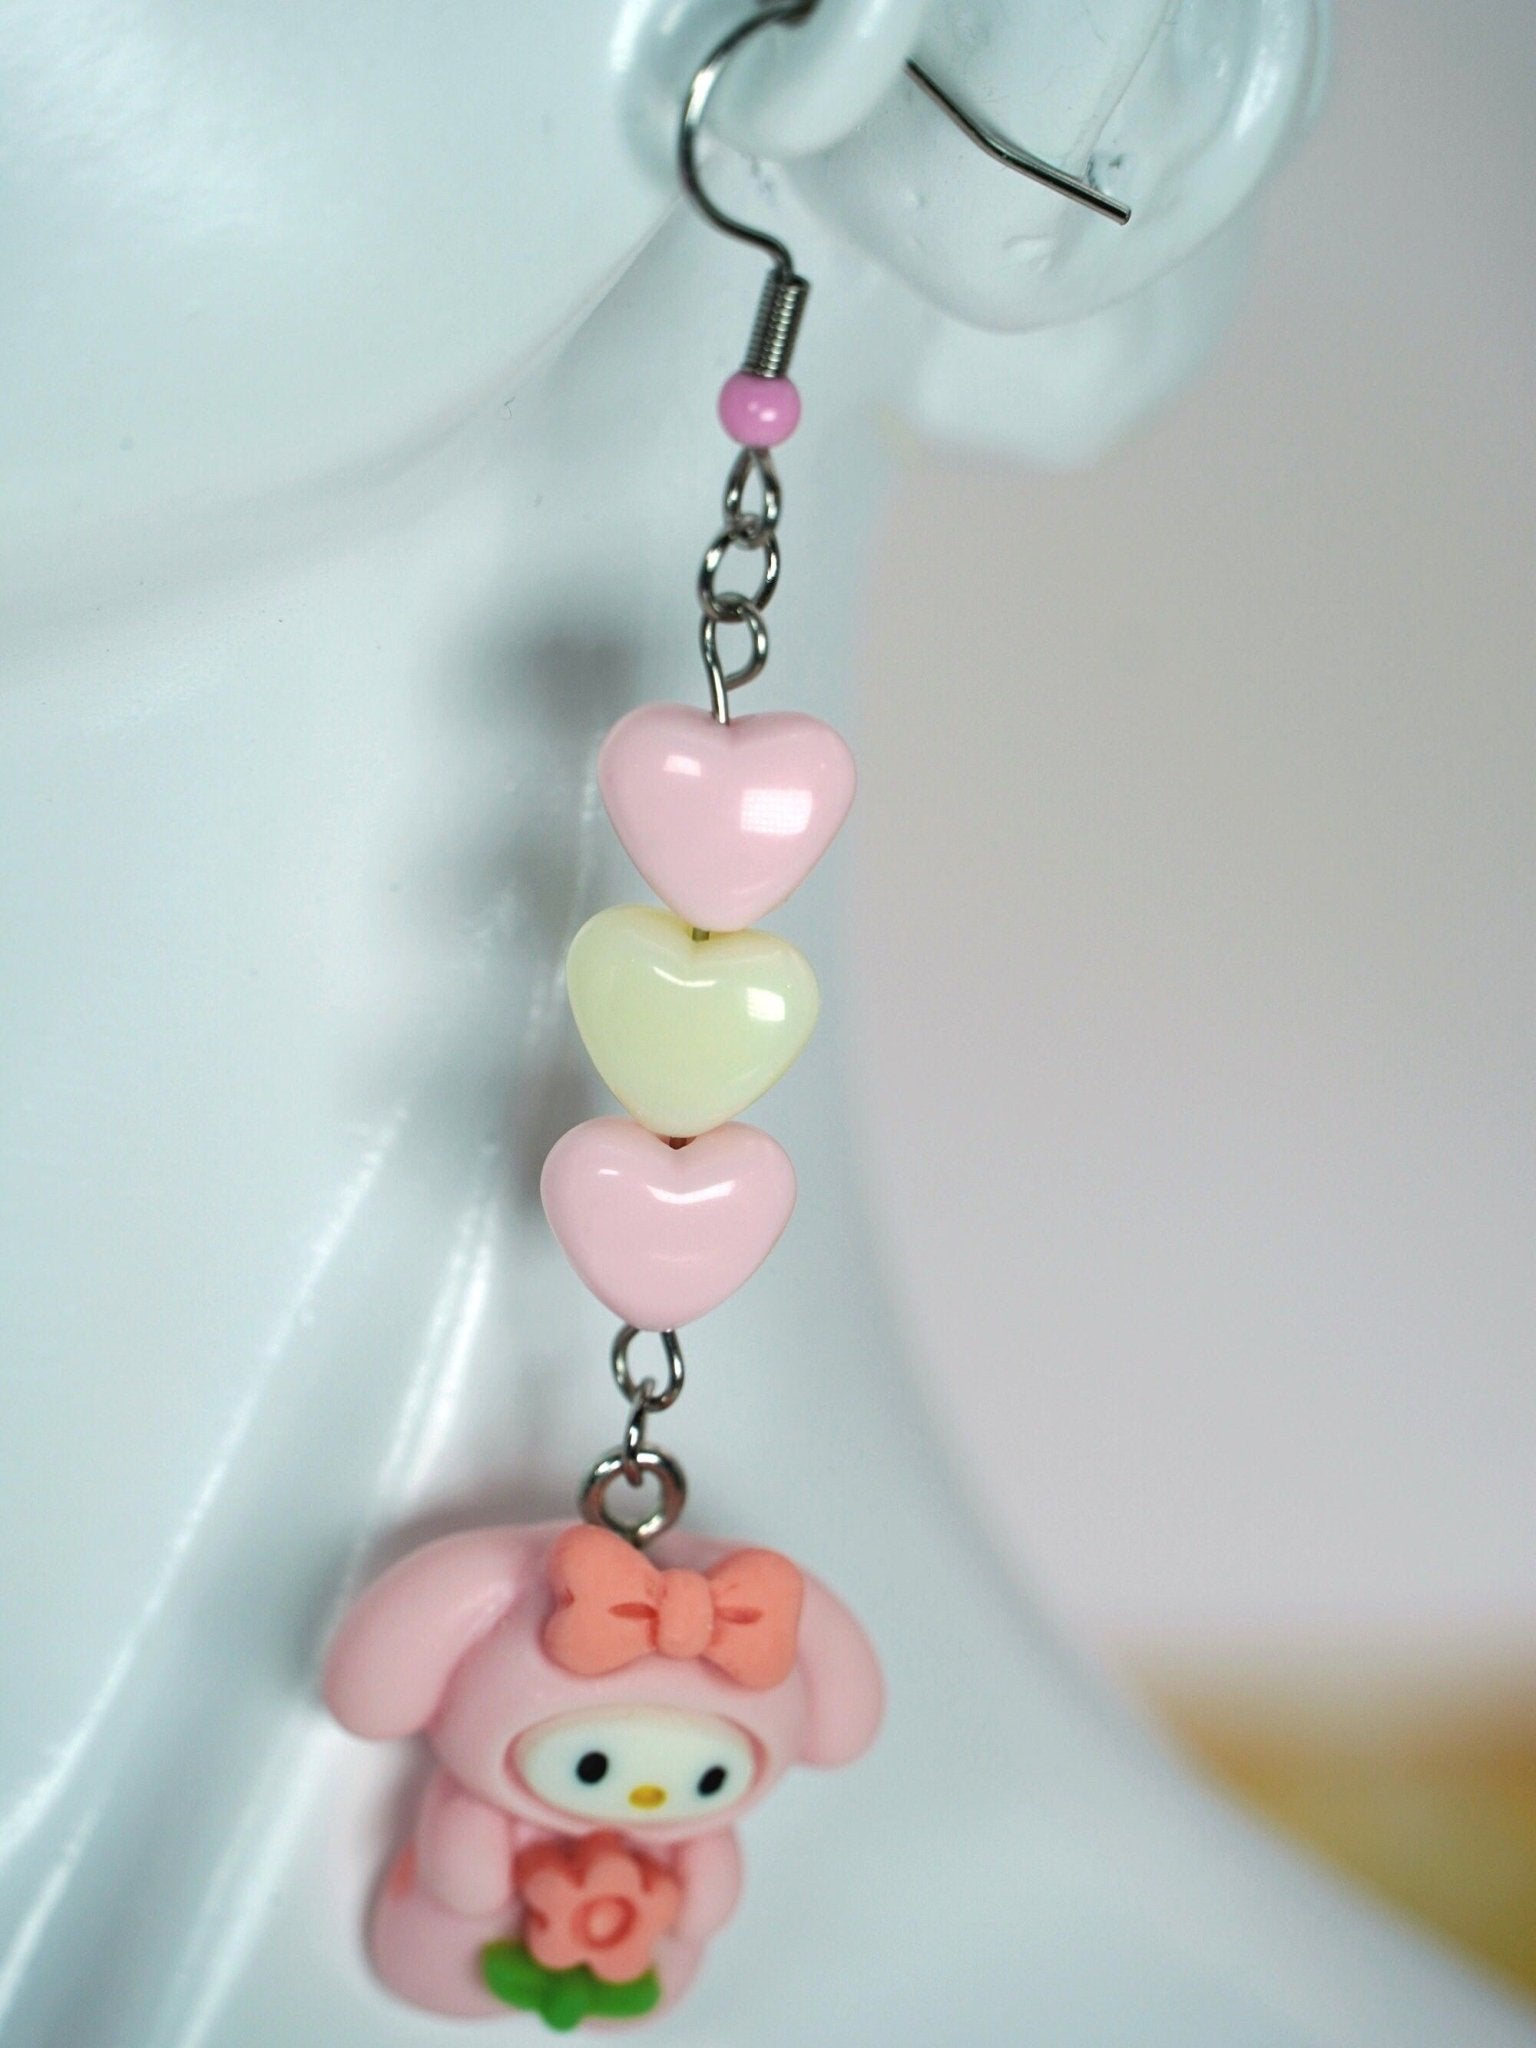 Kawaii Bunny Pastel Heart Drop Earrings with Pink and White Hearts and Pink Accented Stainless Steel Earring Hooks, Harajuku Japan Earrings - Dekowaii Jewelry Company